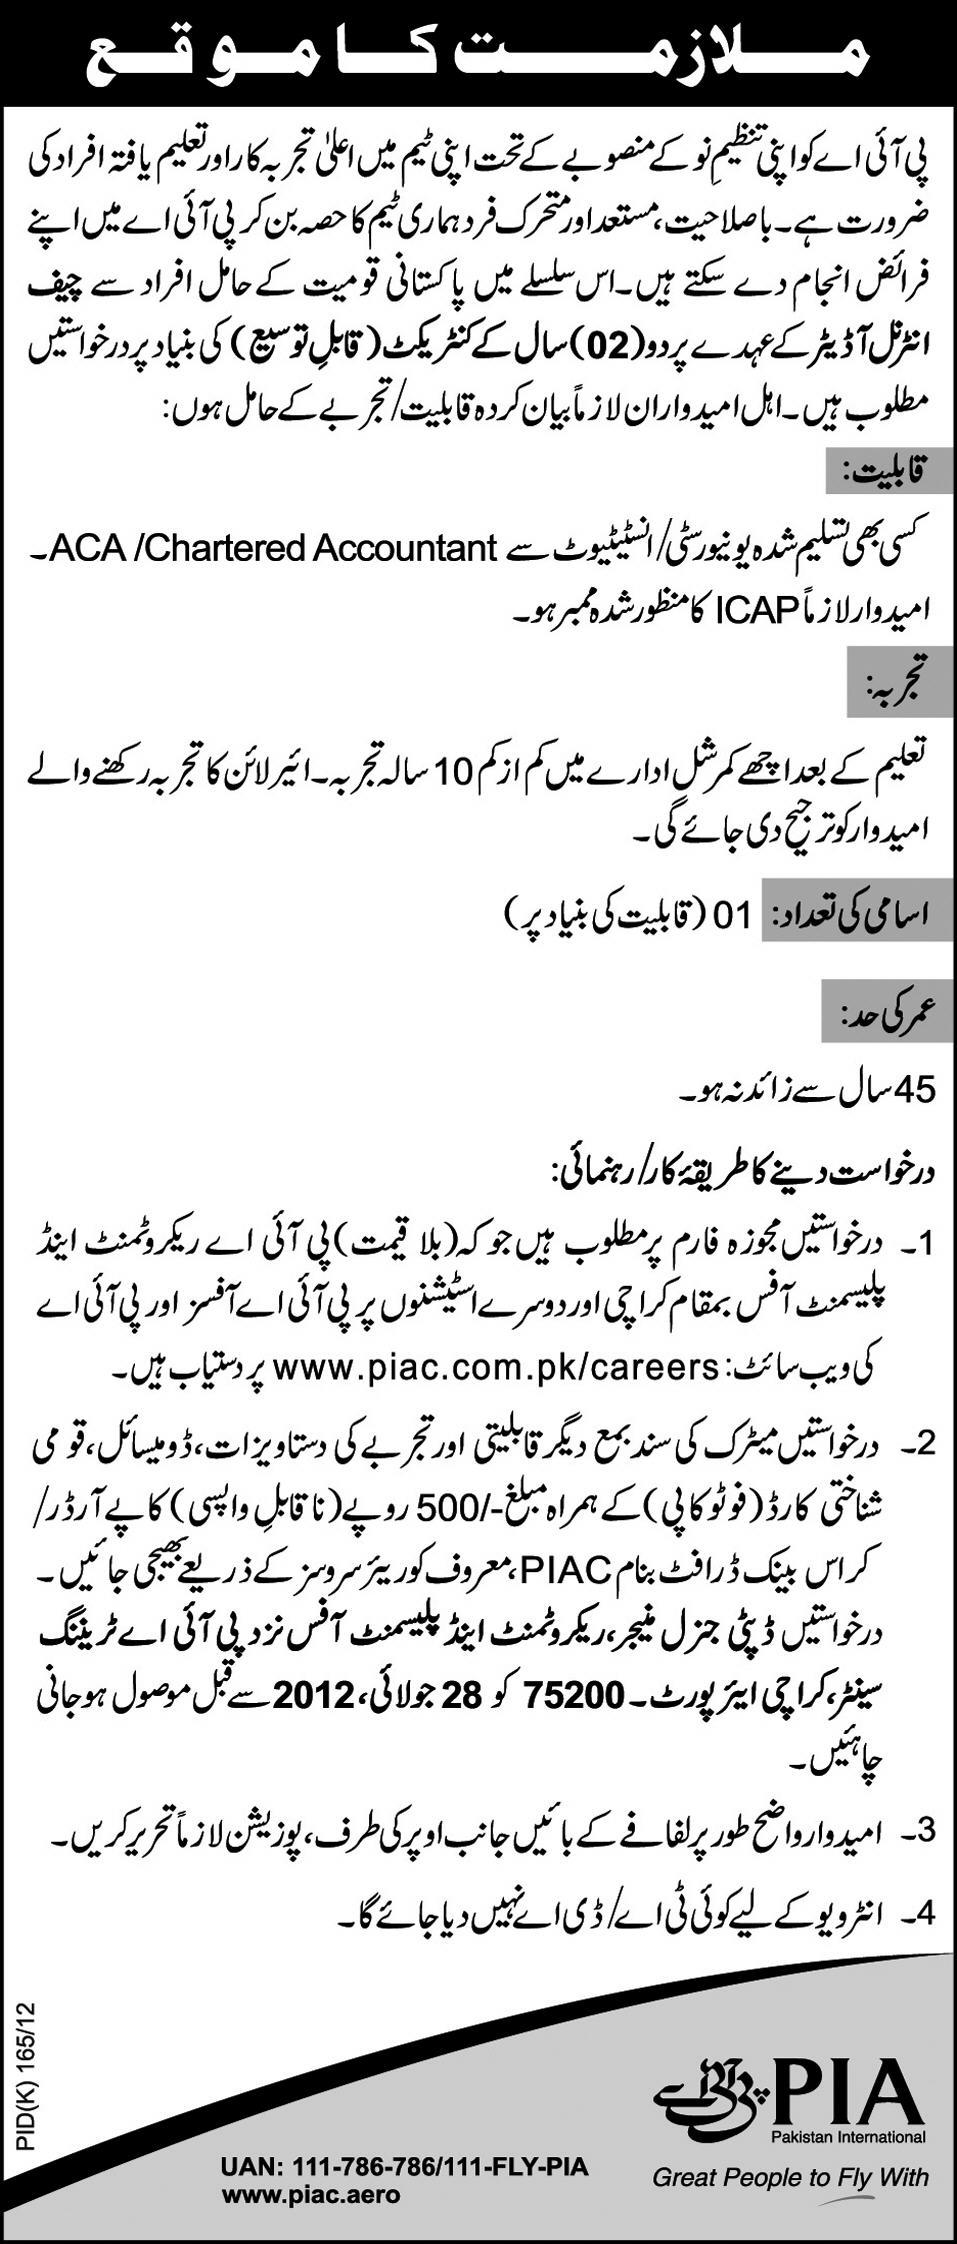 PIA Pakistan International Airlines Requires Chartered Accountant (Government Job)